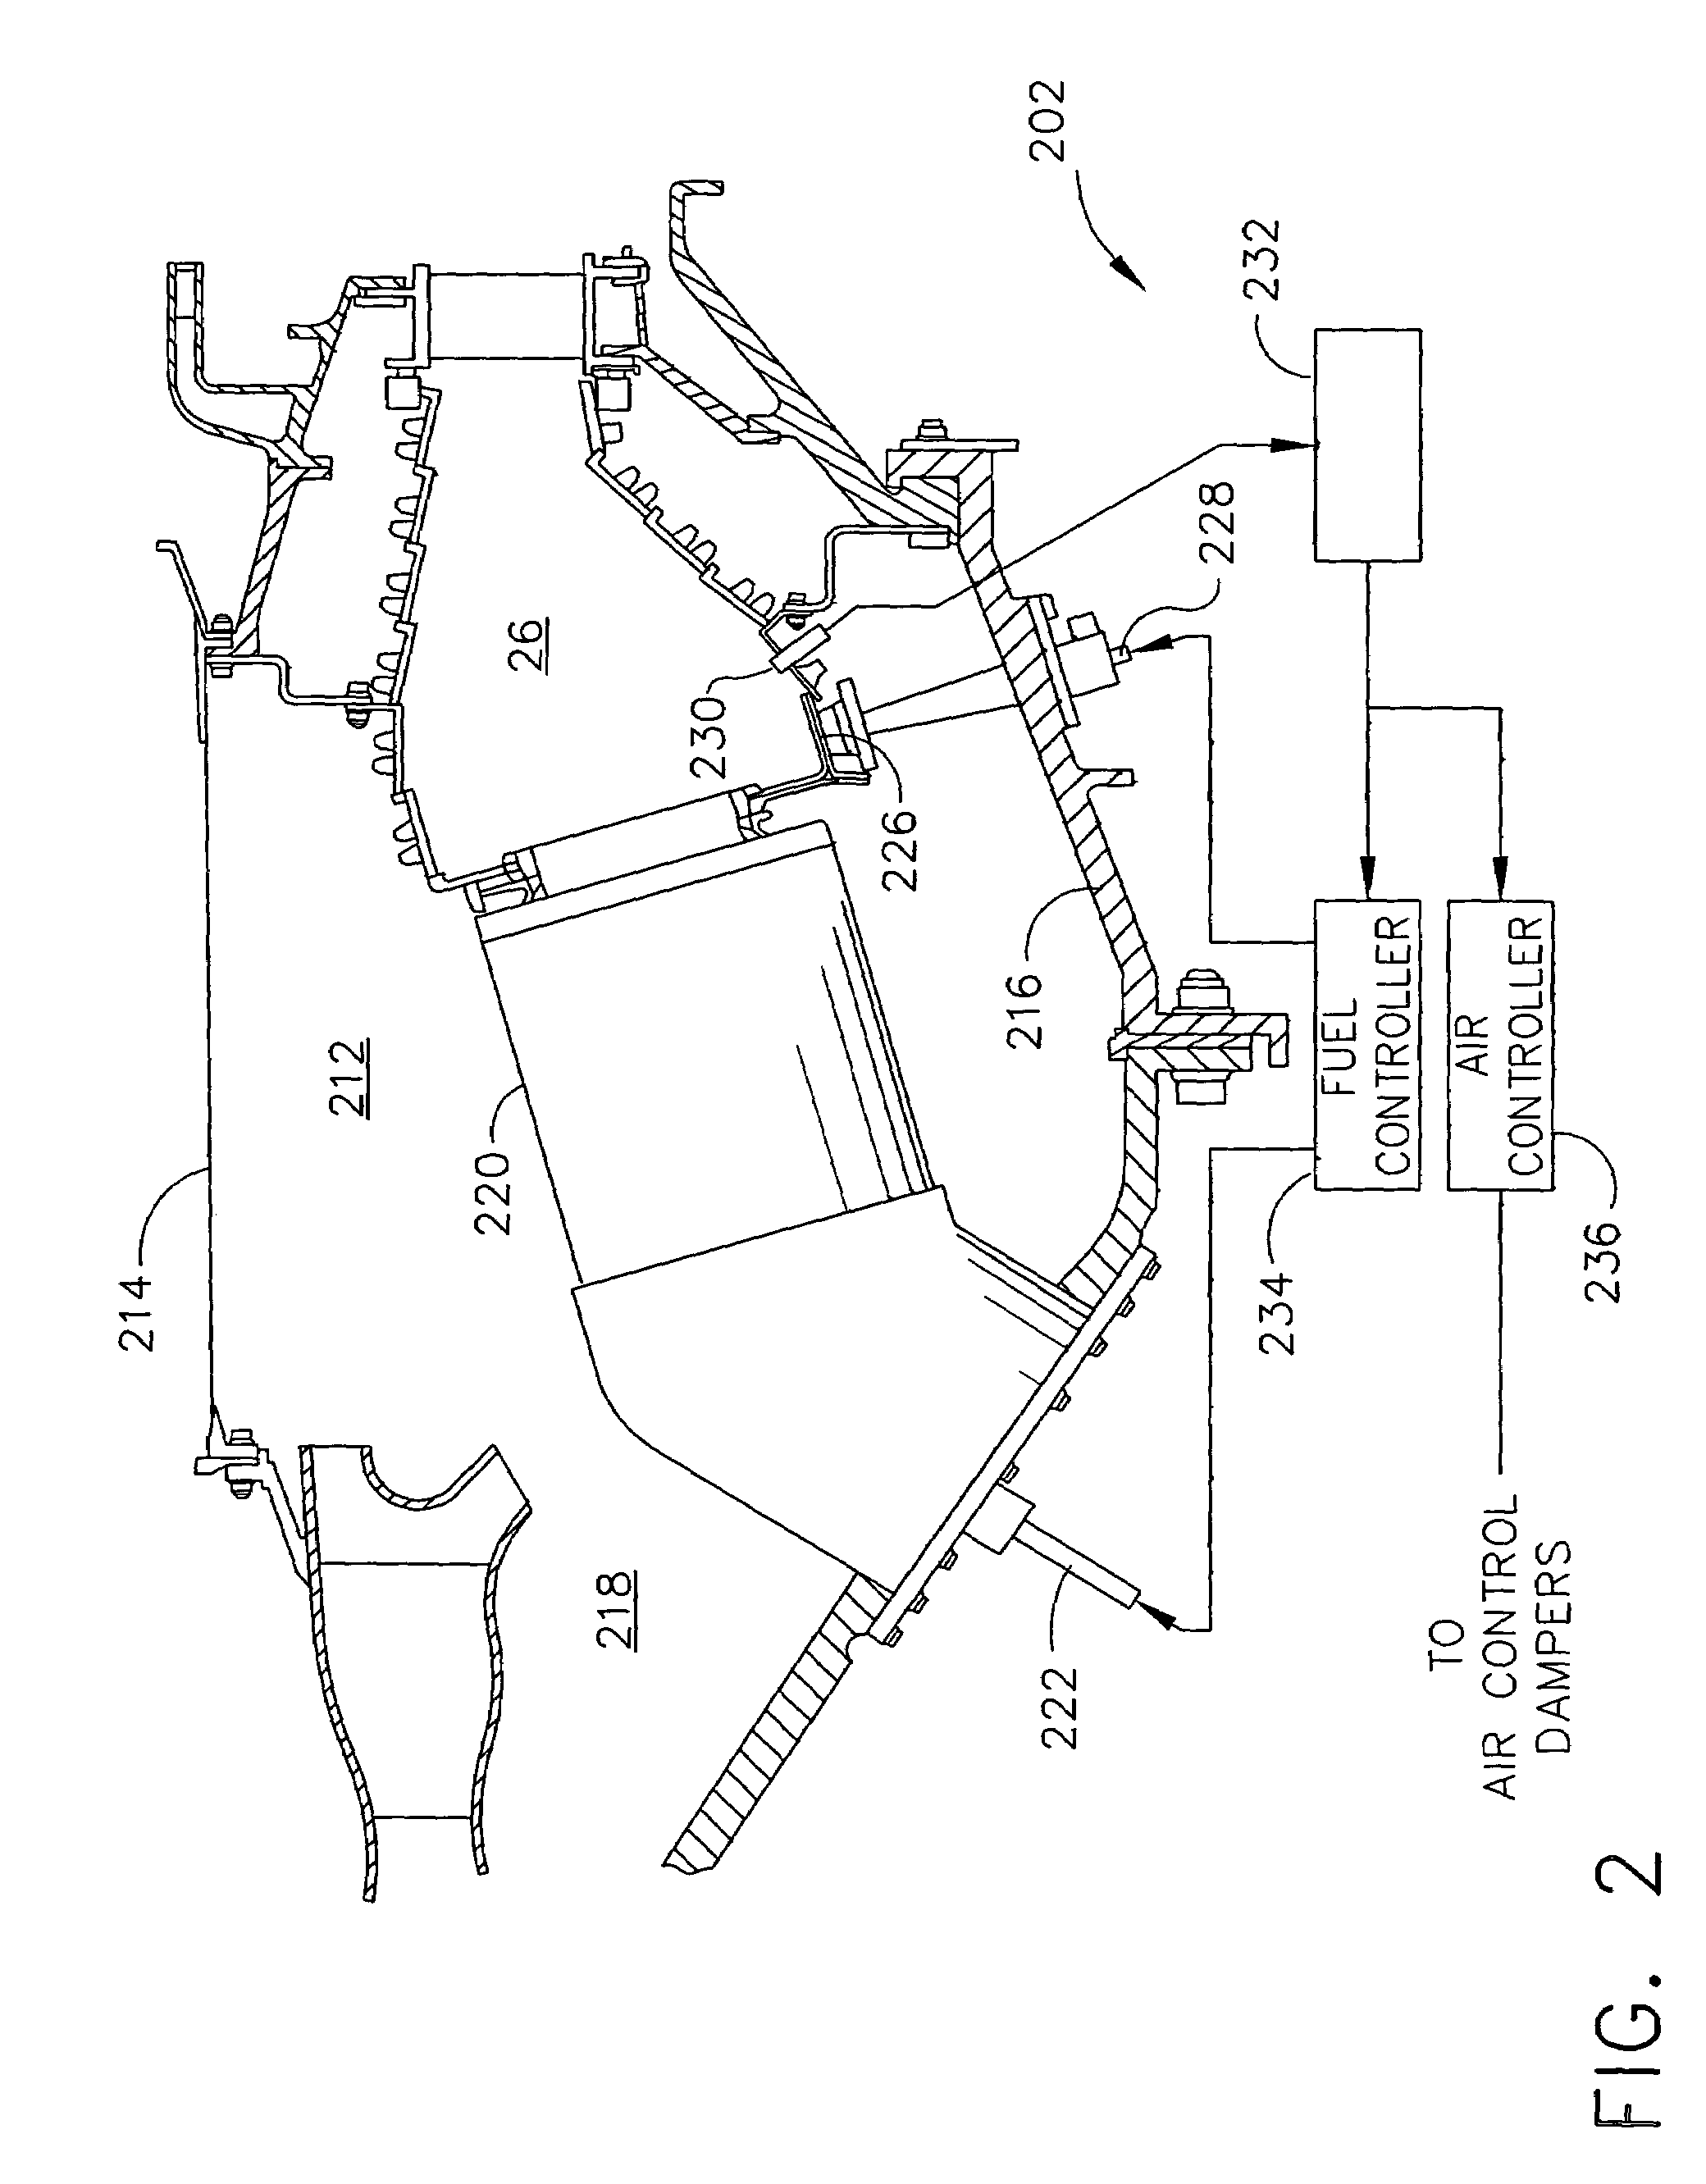 Methods and apparatus for gas turbine engine lean blowout avoidance